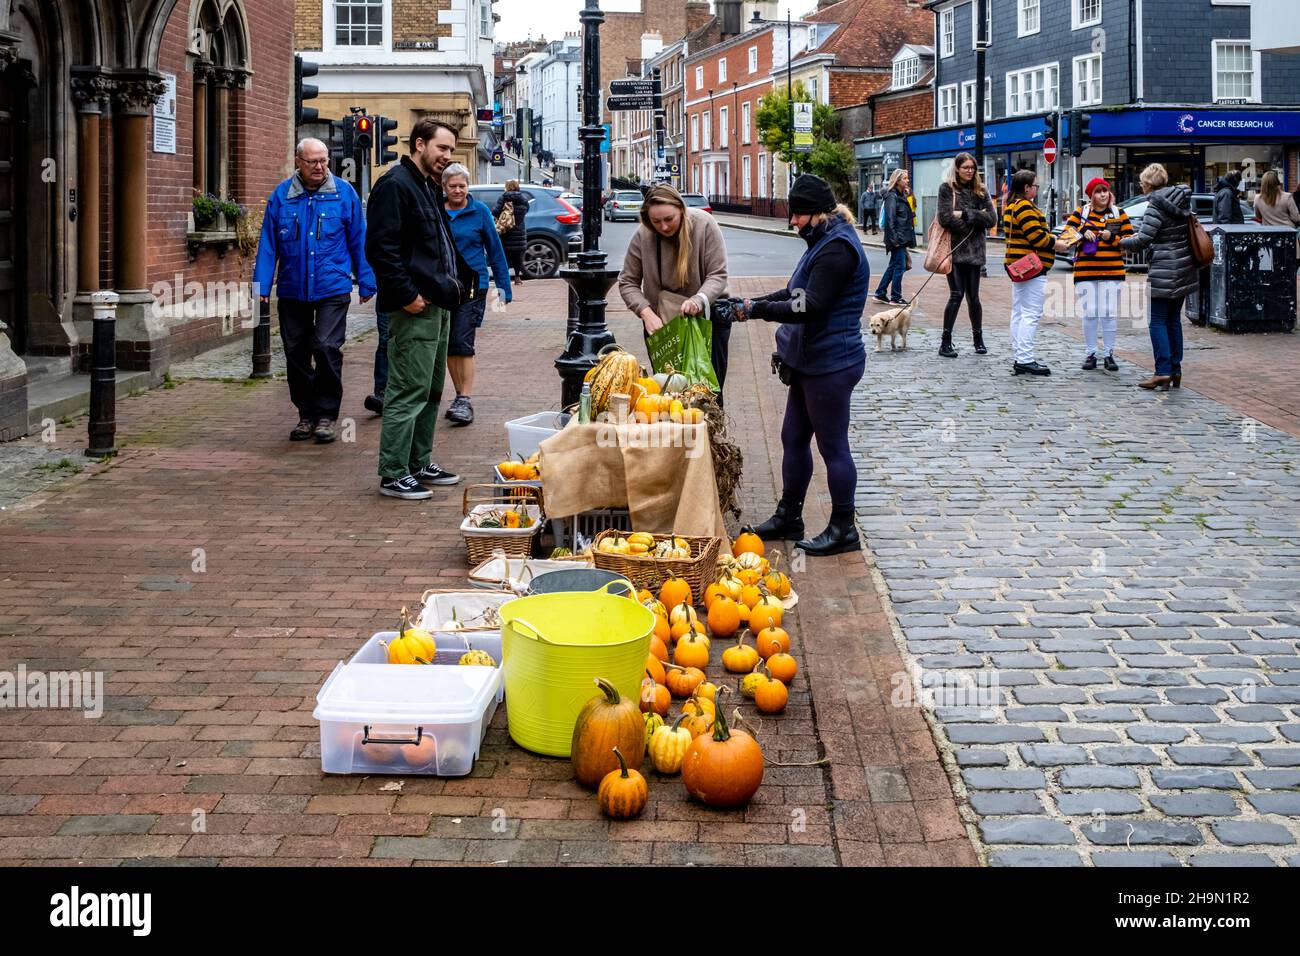 A Woman Sells Colourful Squashes and Pumpkins In The High Street, Lewes, East Sussex, UK. Stock Photo